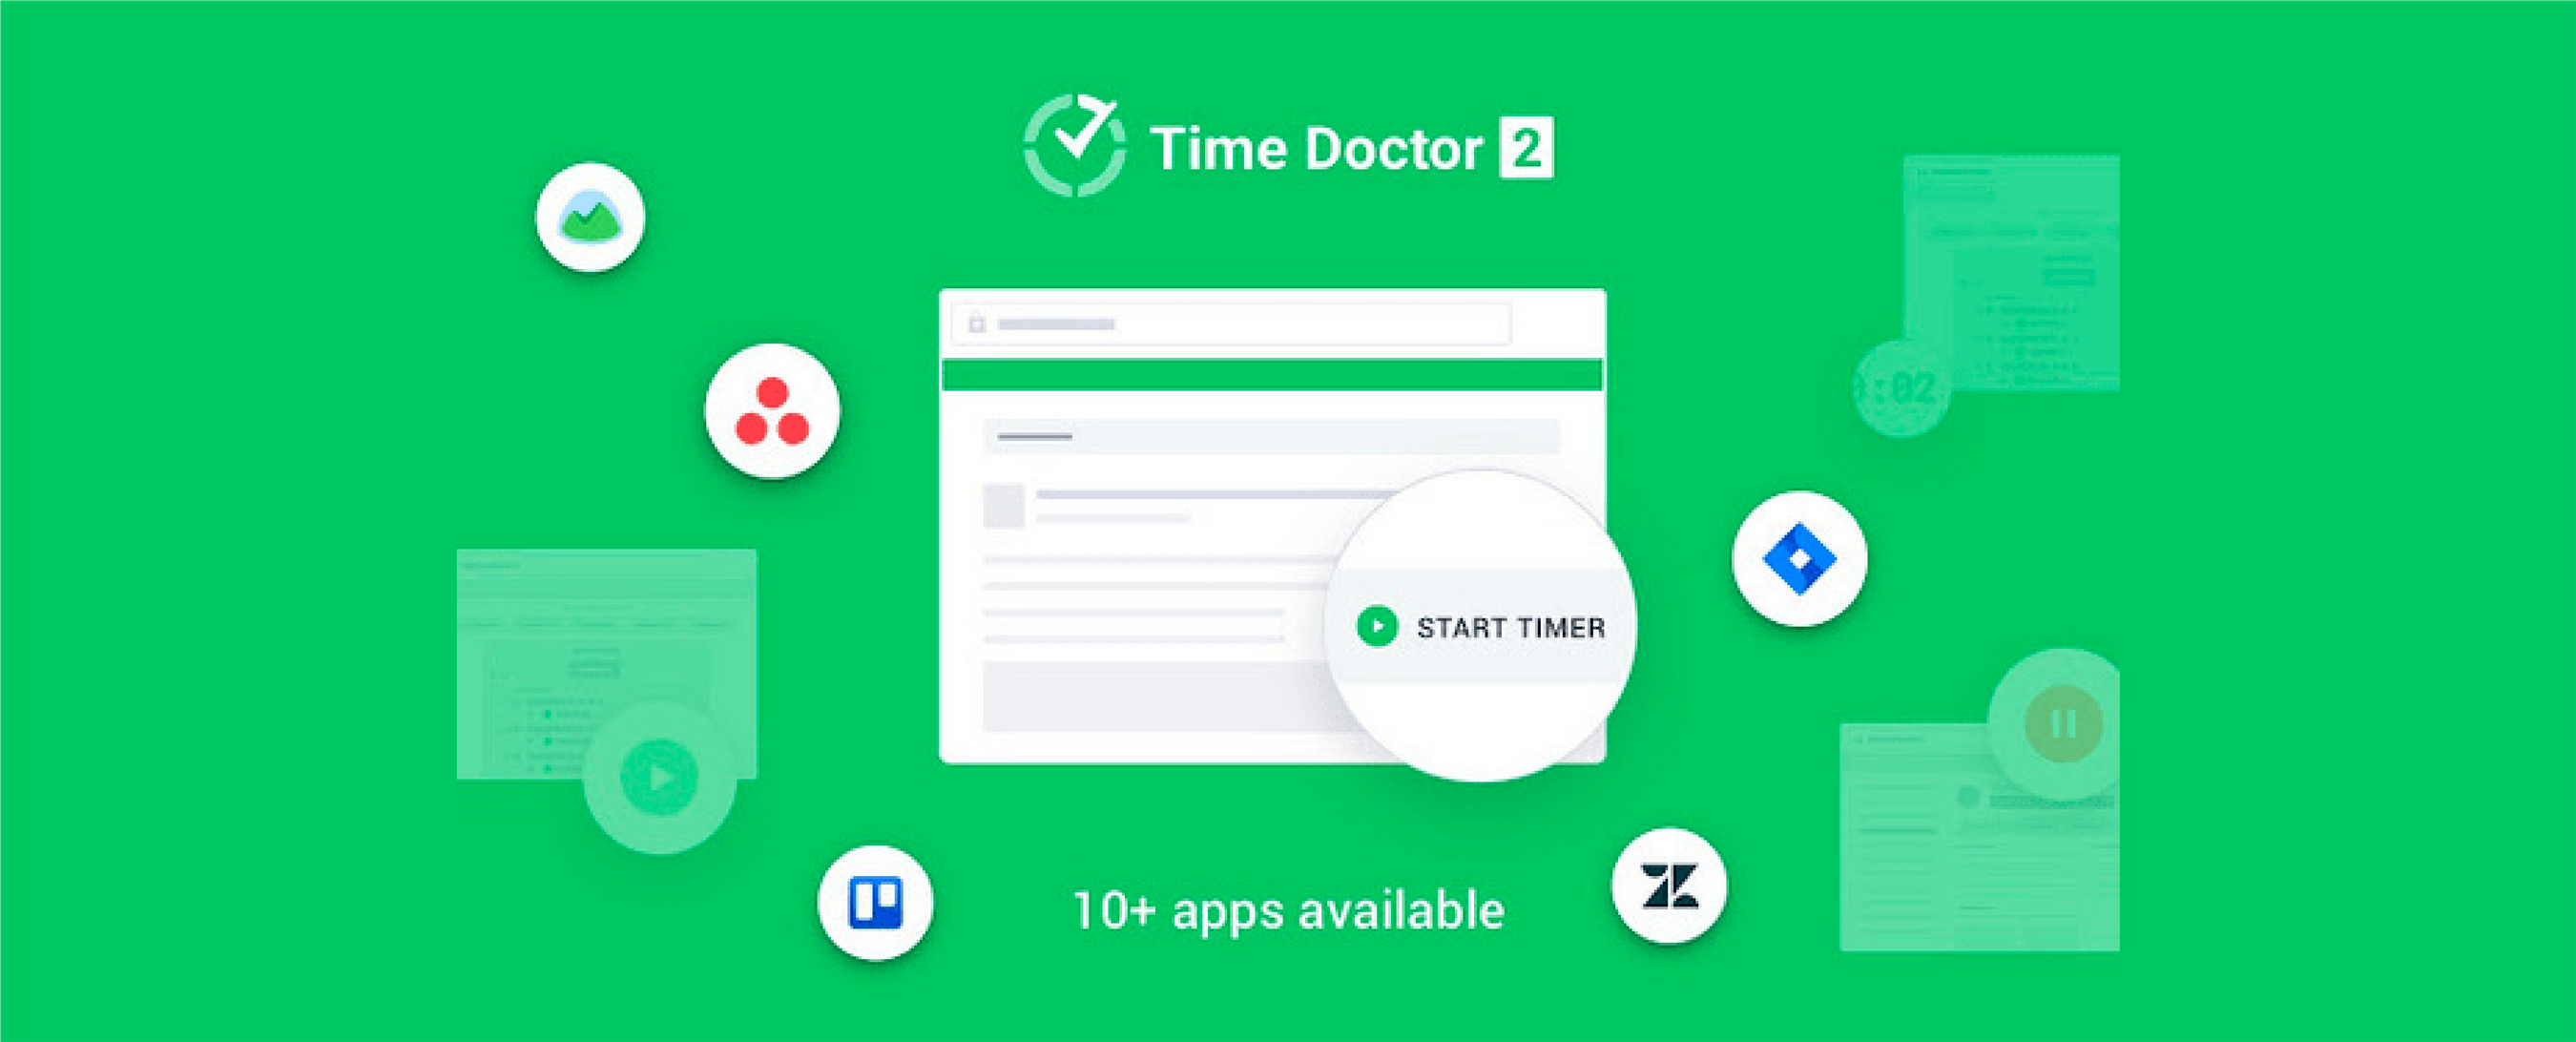 time doctor lite download